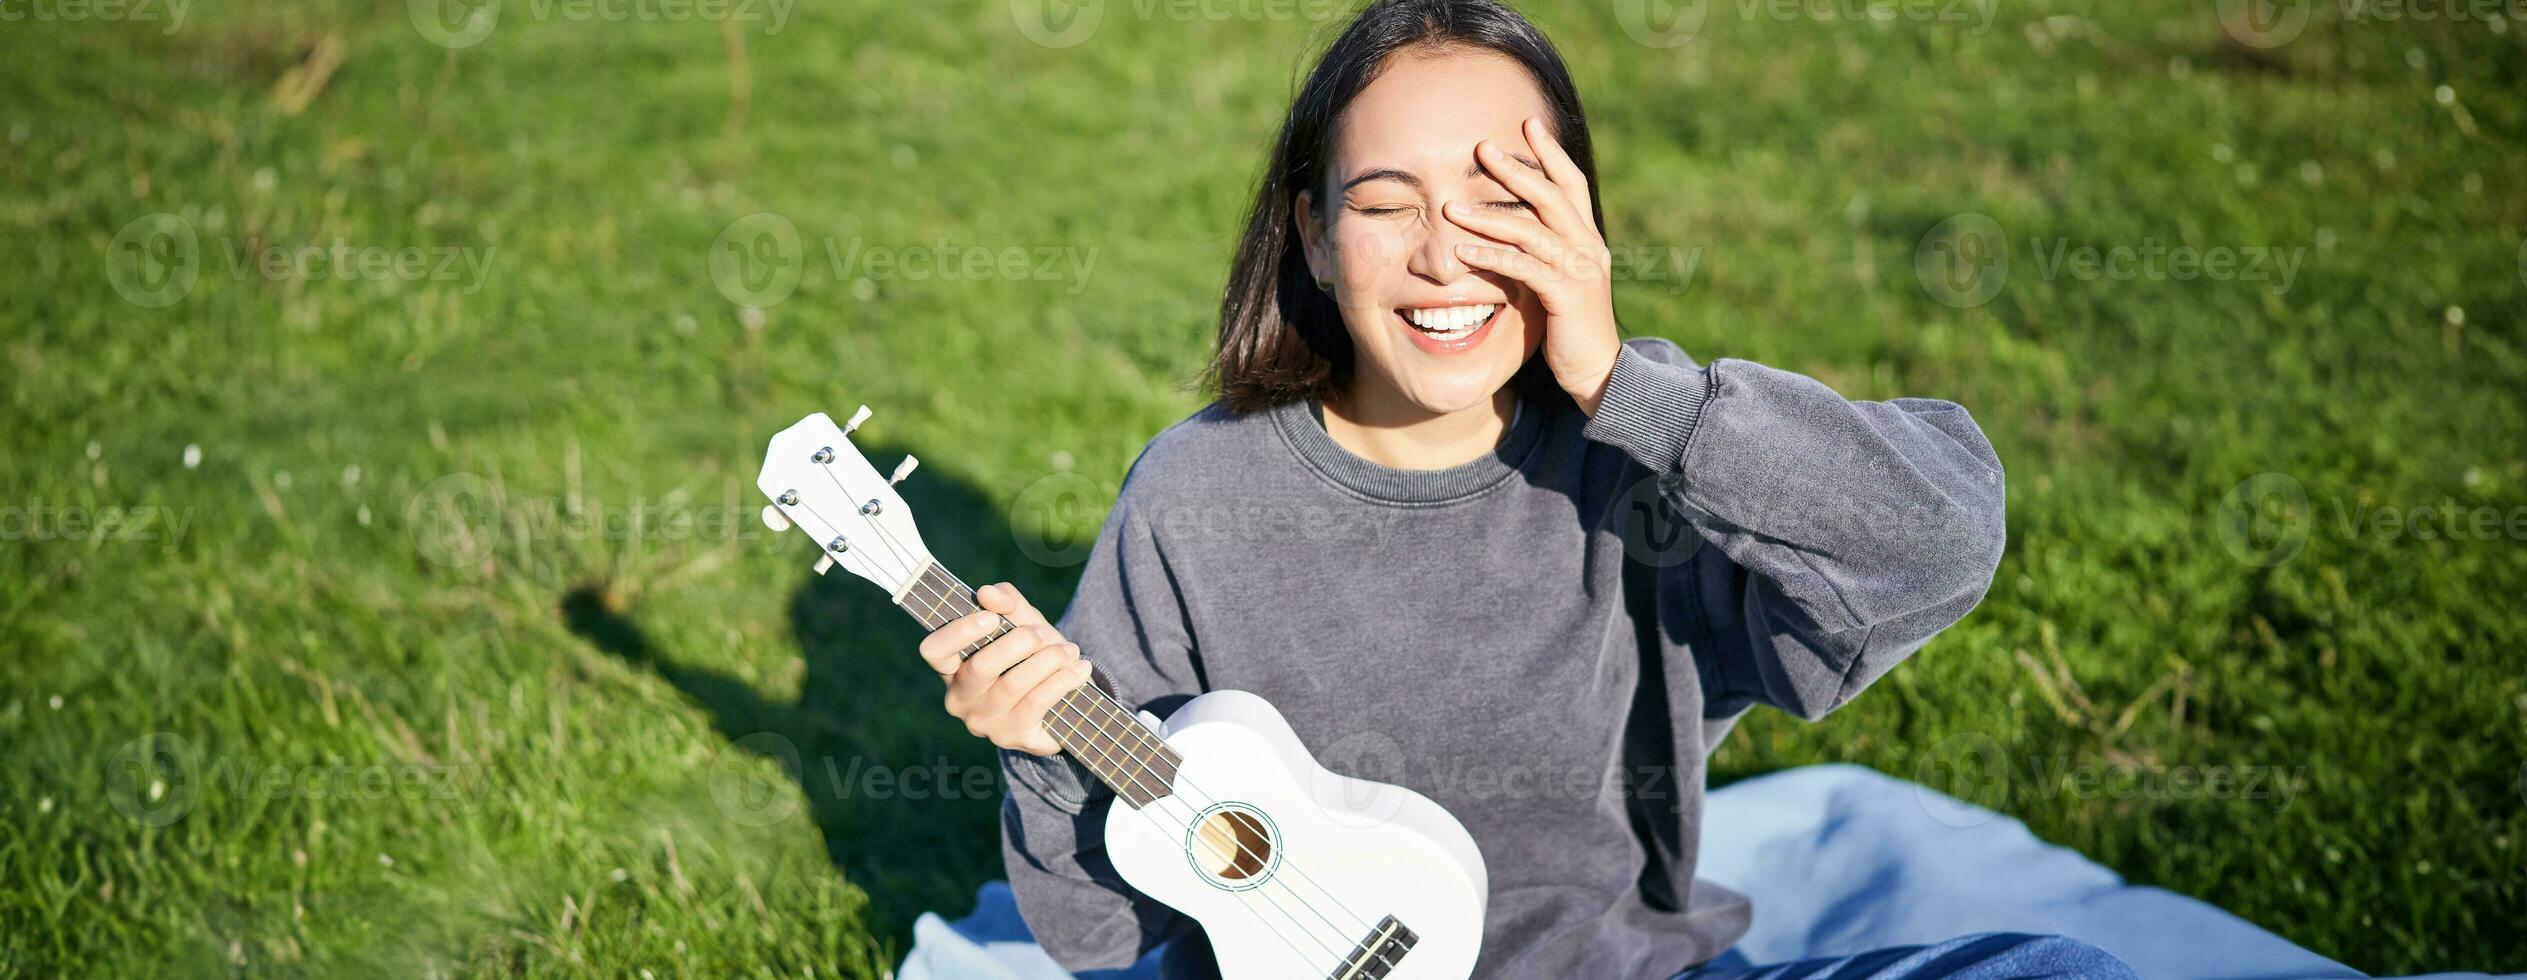 Smiling asian girl with ukulele, playing in park and singing, lifestyle concept photo